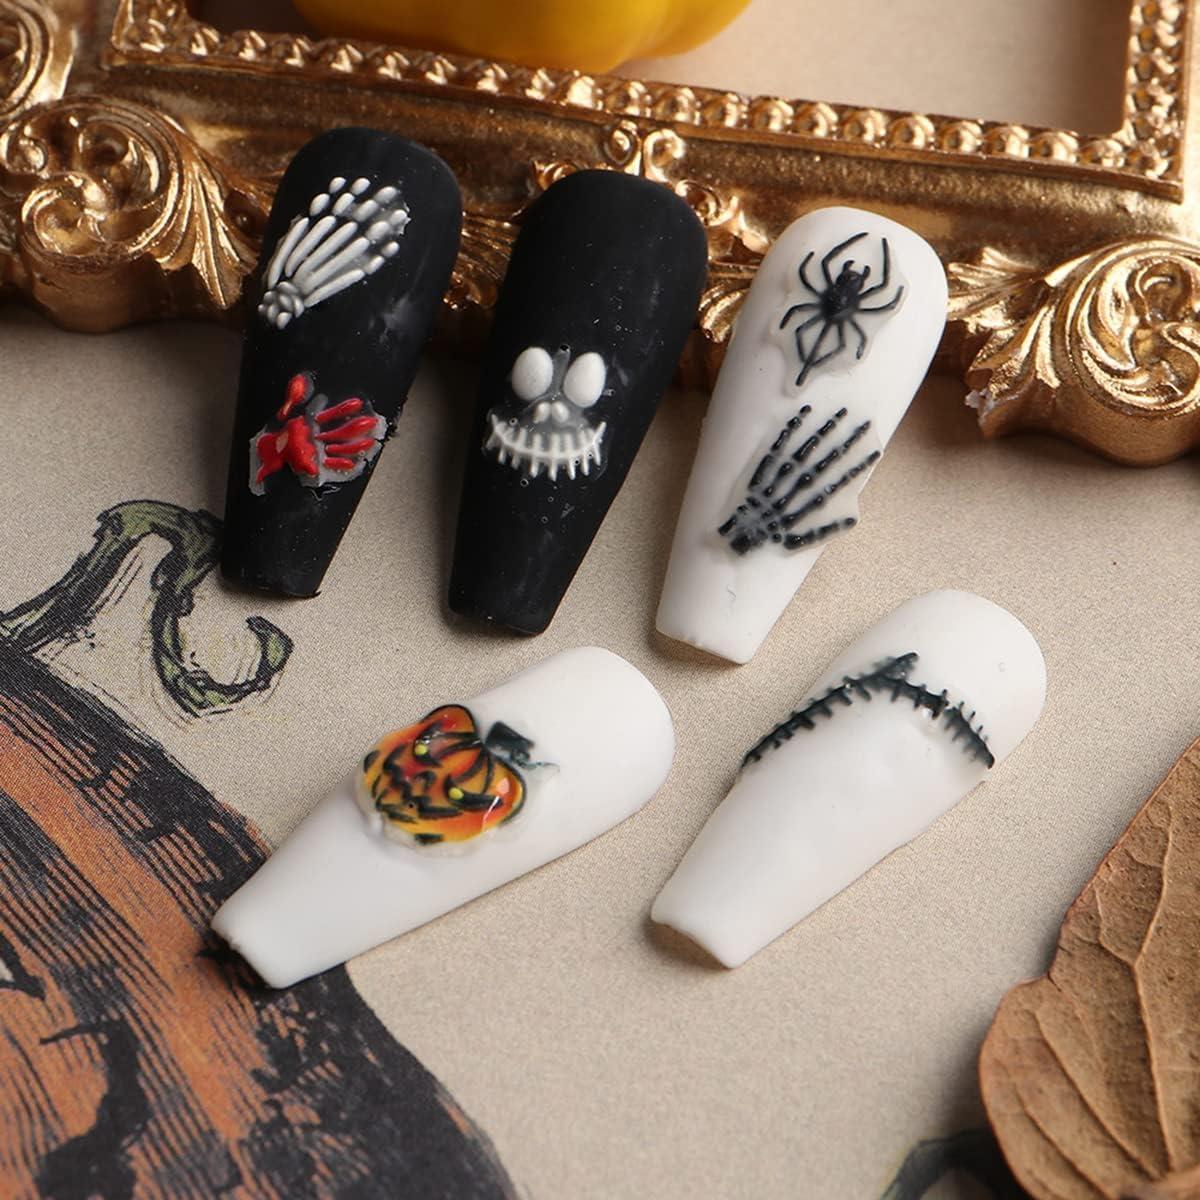  Halloween Acrylic Nail Stickers Realistic Eyes Bone Spider 5D  Self Adhesive Nail Art Decoration Festival Accessories DIY Nail Embossed  Sliders Gel Polish Engraved Decals Nails Manicure for Women and Girls 4pcs 